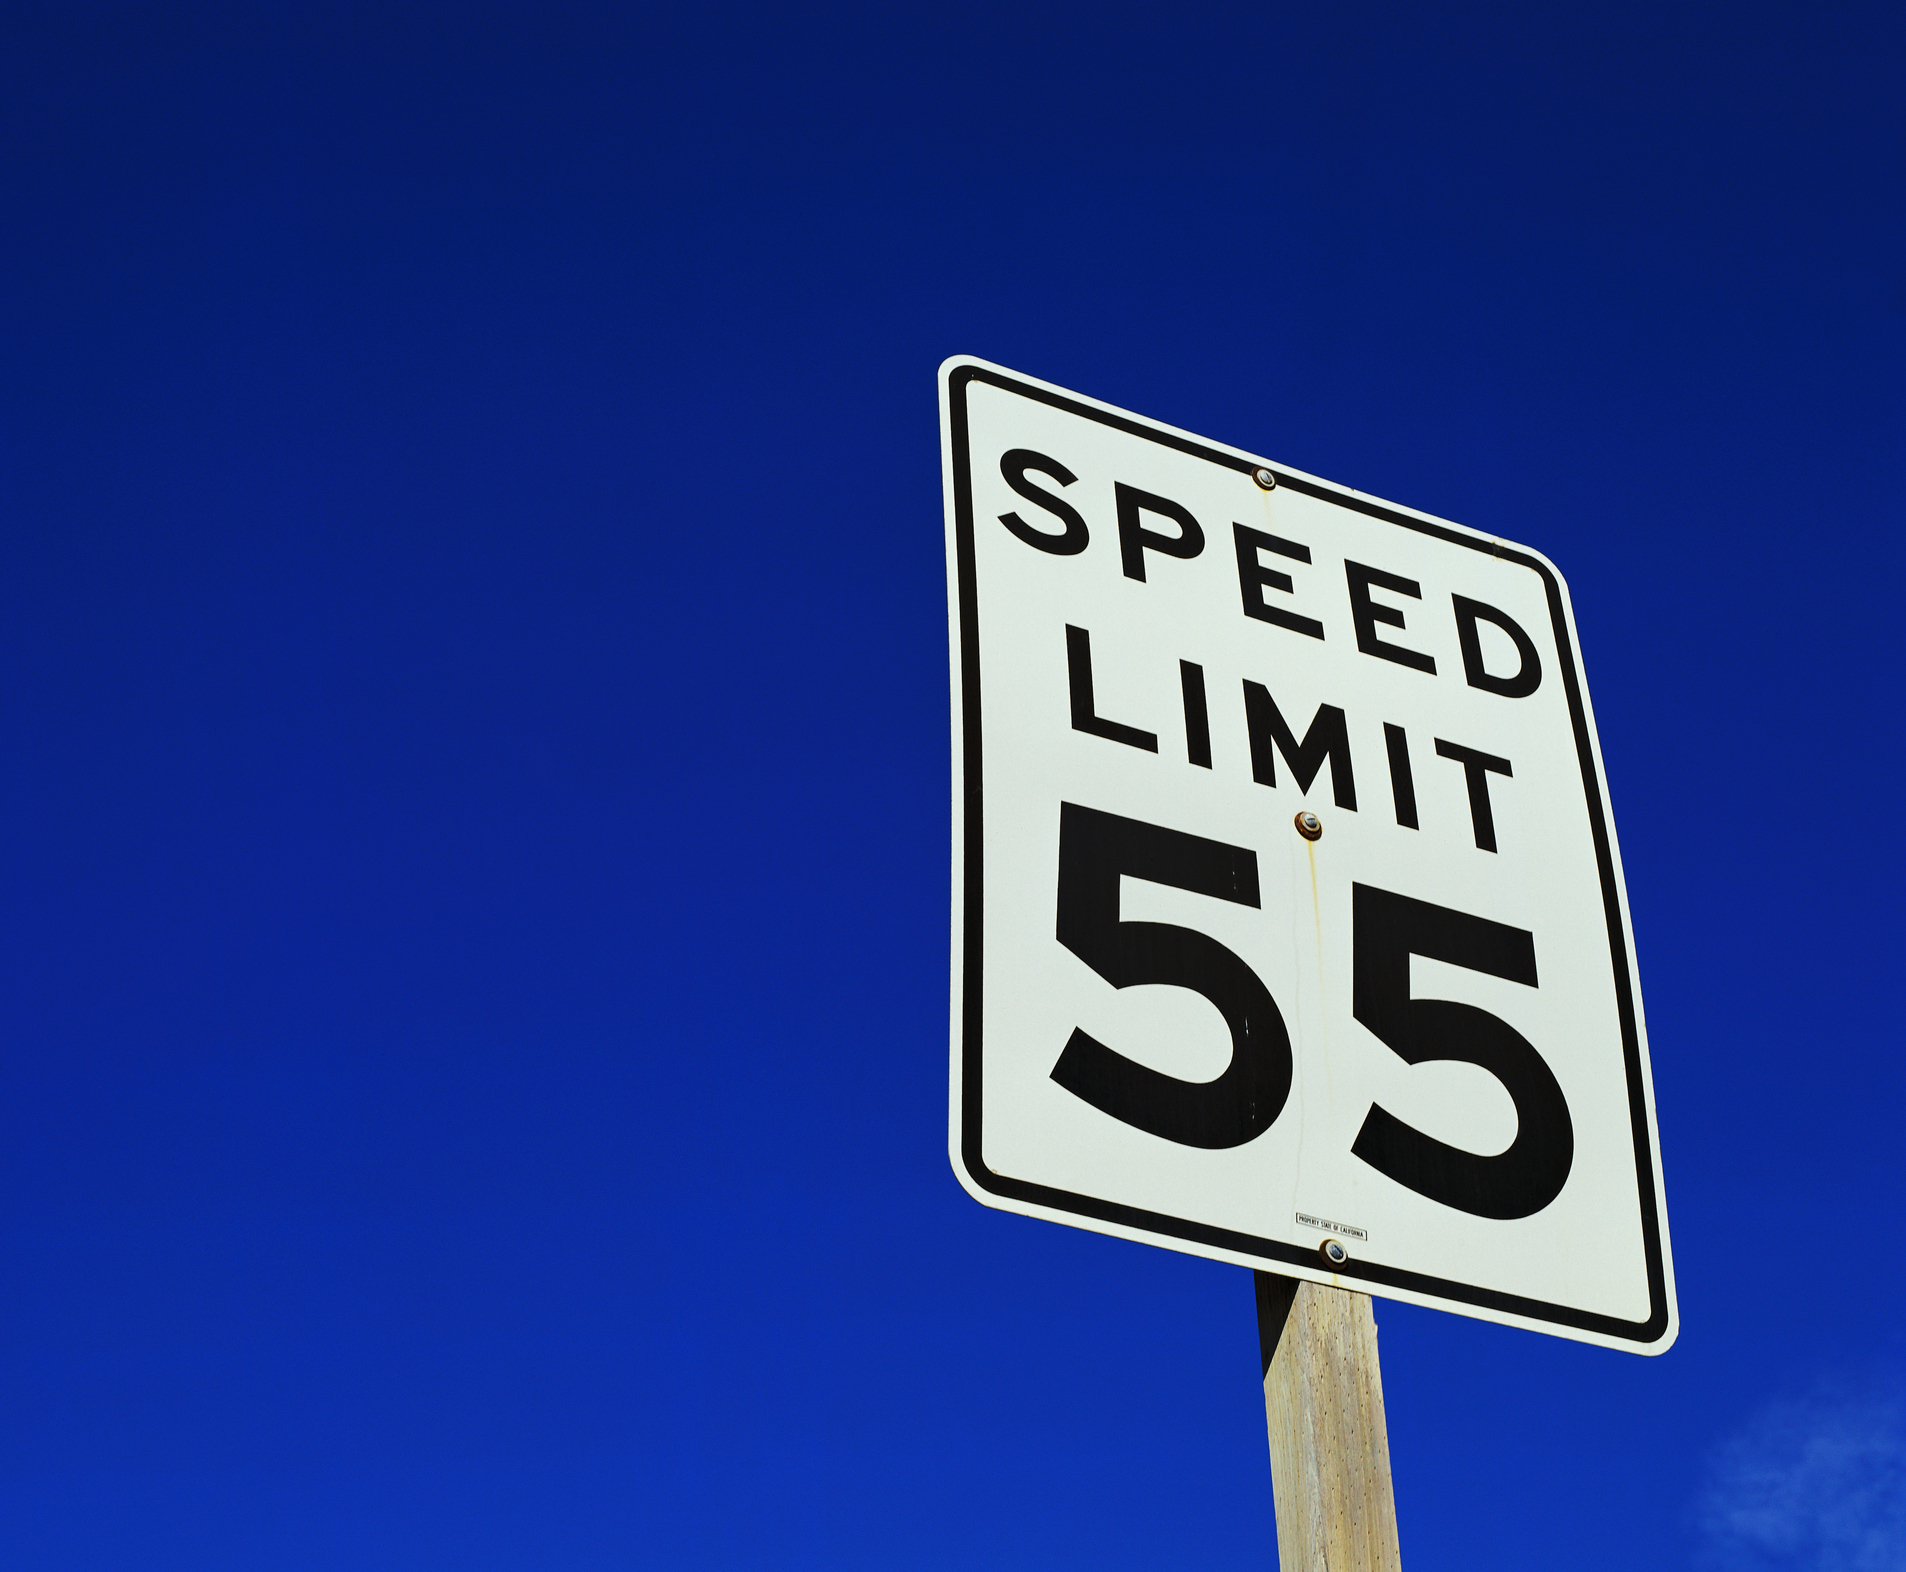 A speed limit sign showing &quot;55&quot; against a clear sky